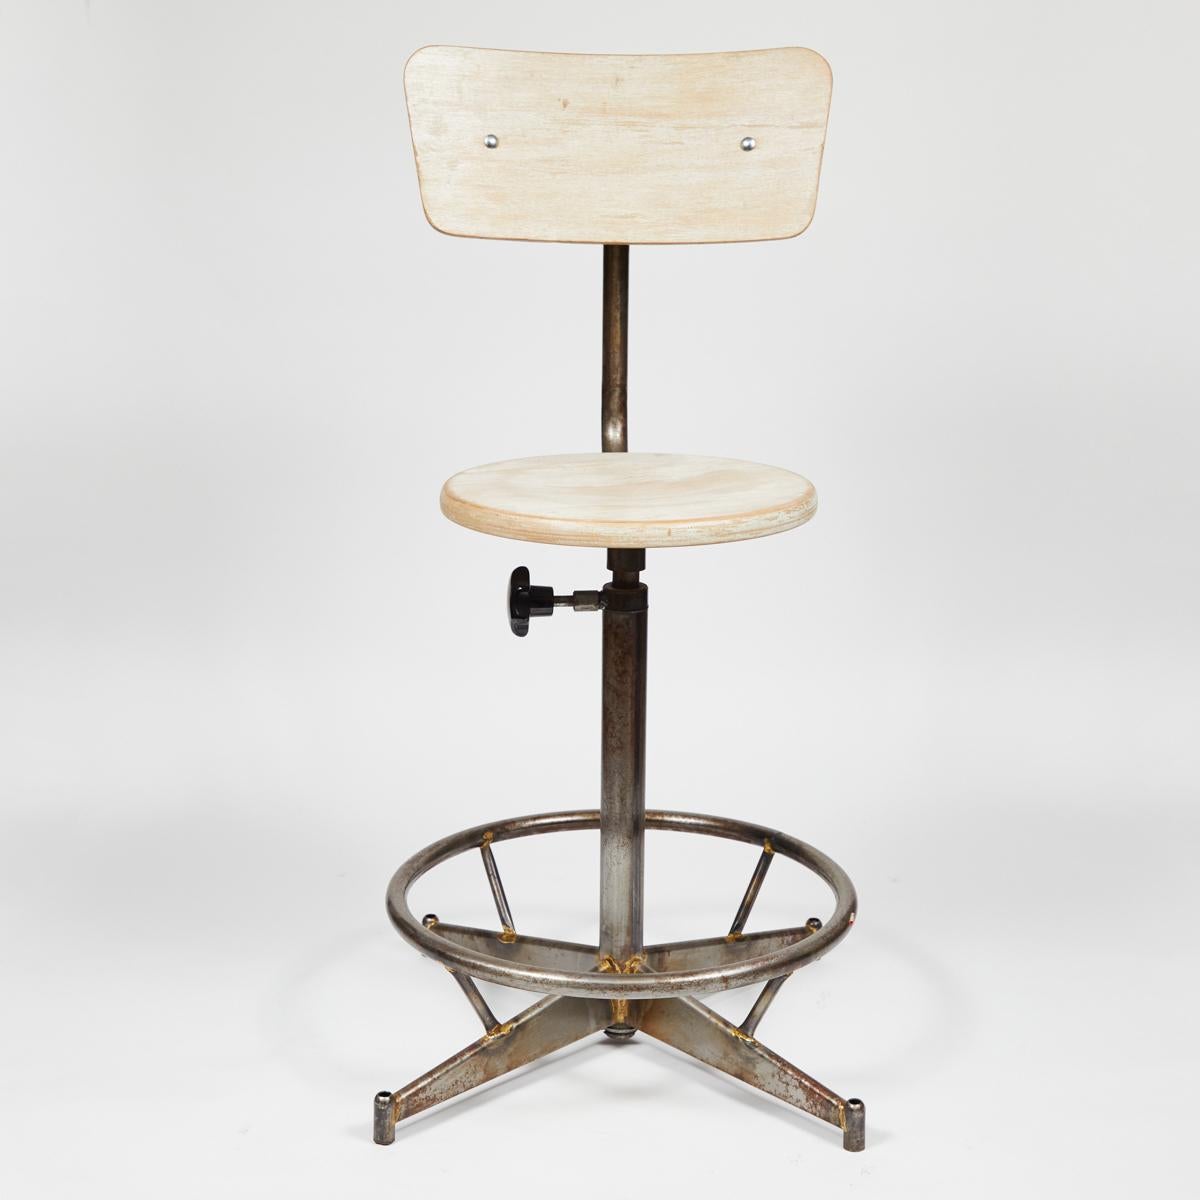 1940s French industrial swivel chair or stool in light blonde wood with adjustable metal base. Featuring a flat circular seat and curved trapezoidal back, the chair sits on a pedestal base with a circular foot-rest and four thin wedge-shaped legs.